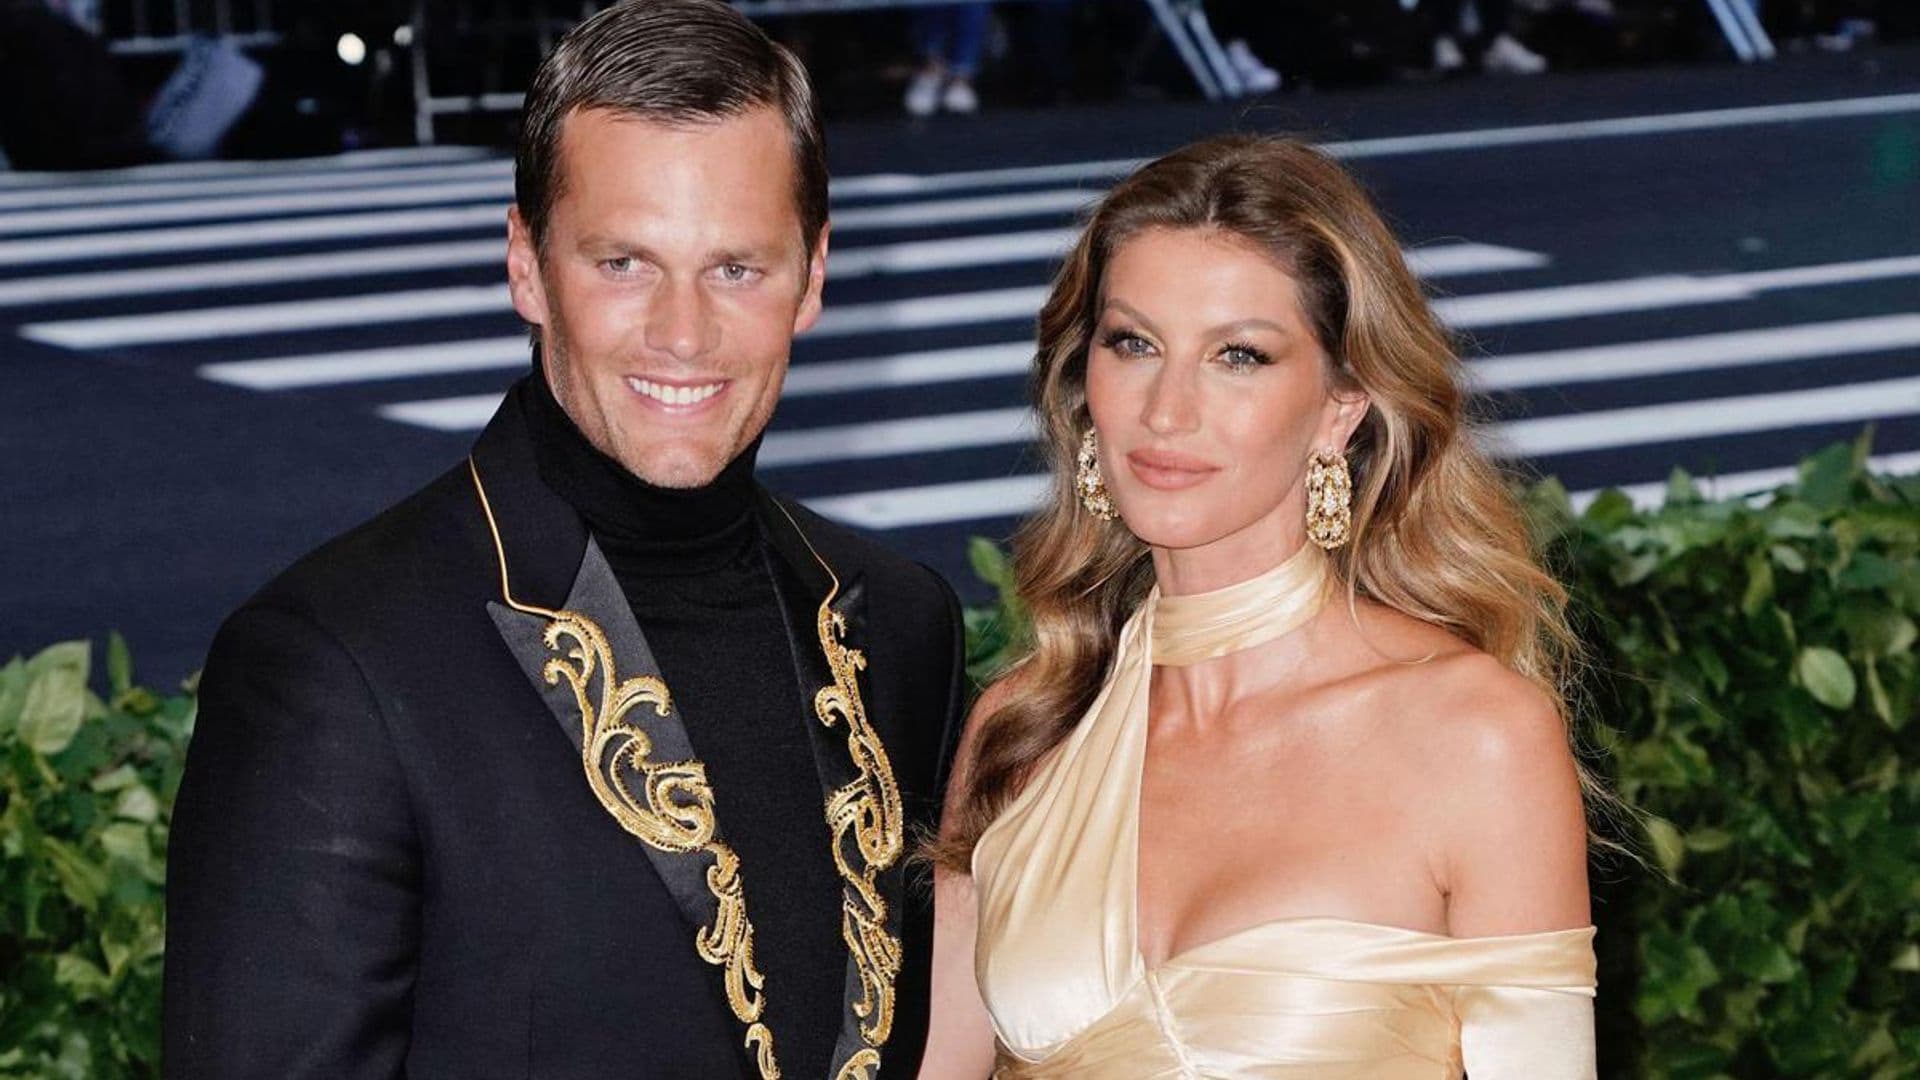 Gisele Bündchen’s ultimatum to Tom Brady didn’t work; the couple is filing for divorce: report